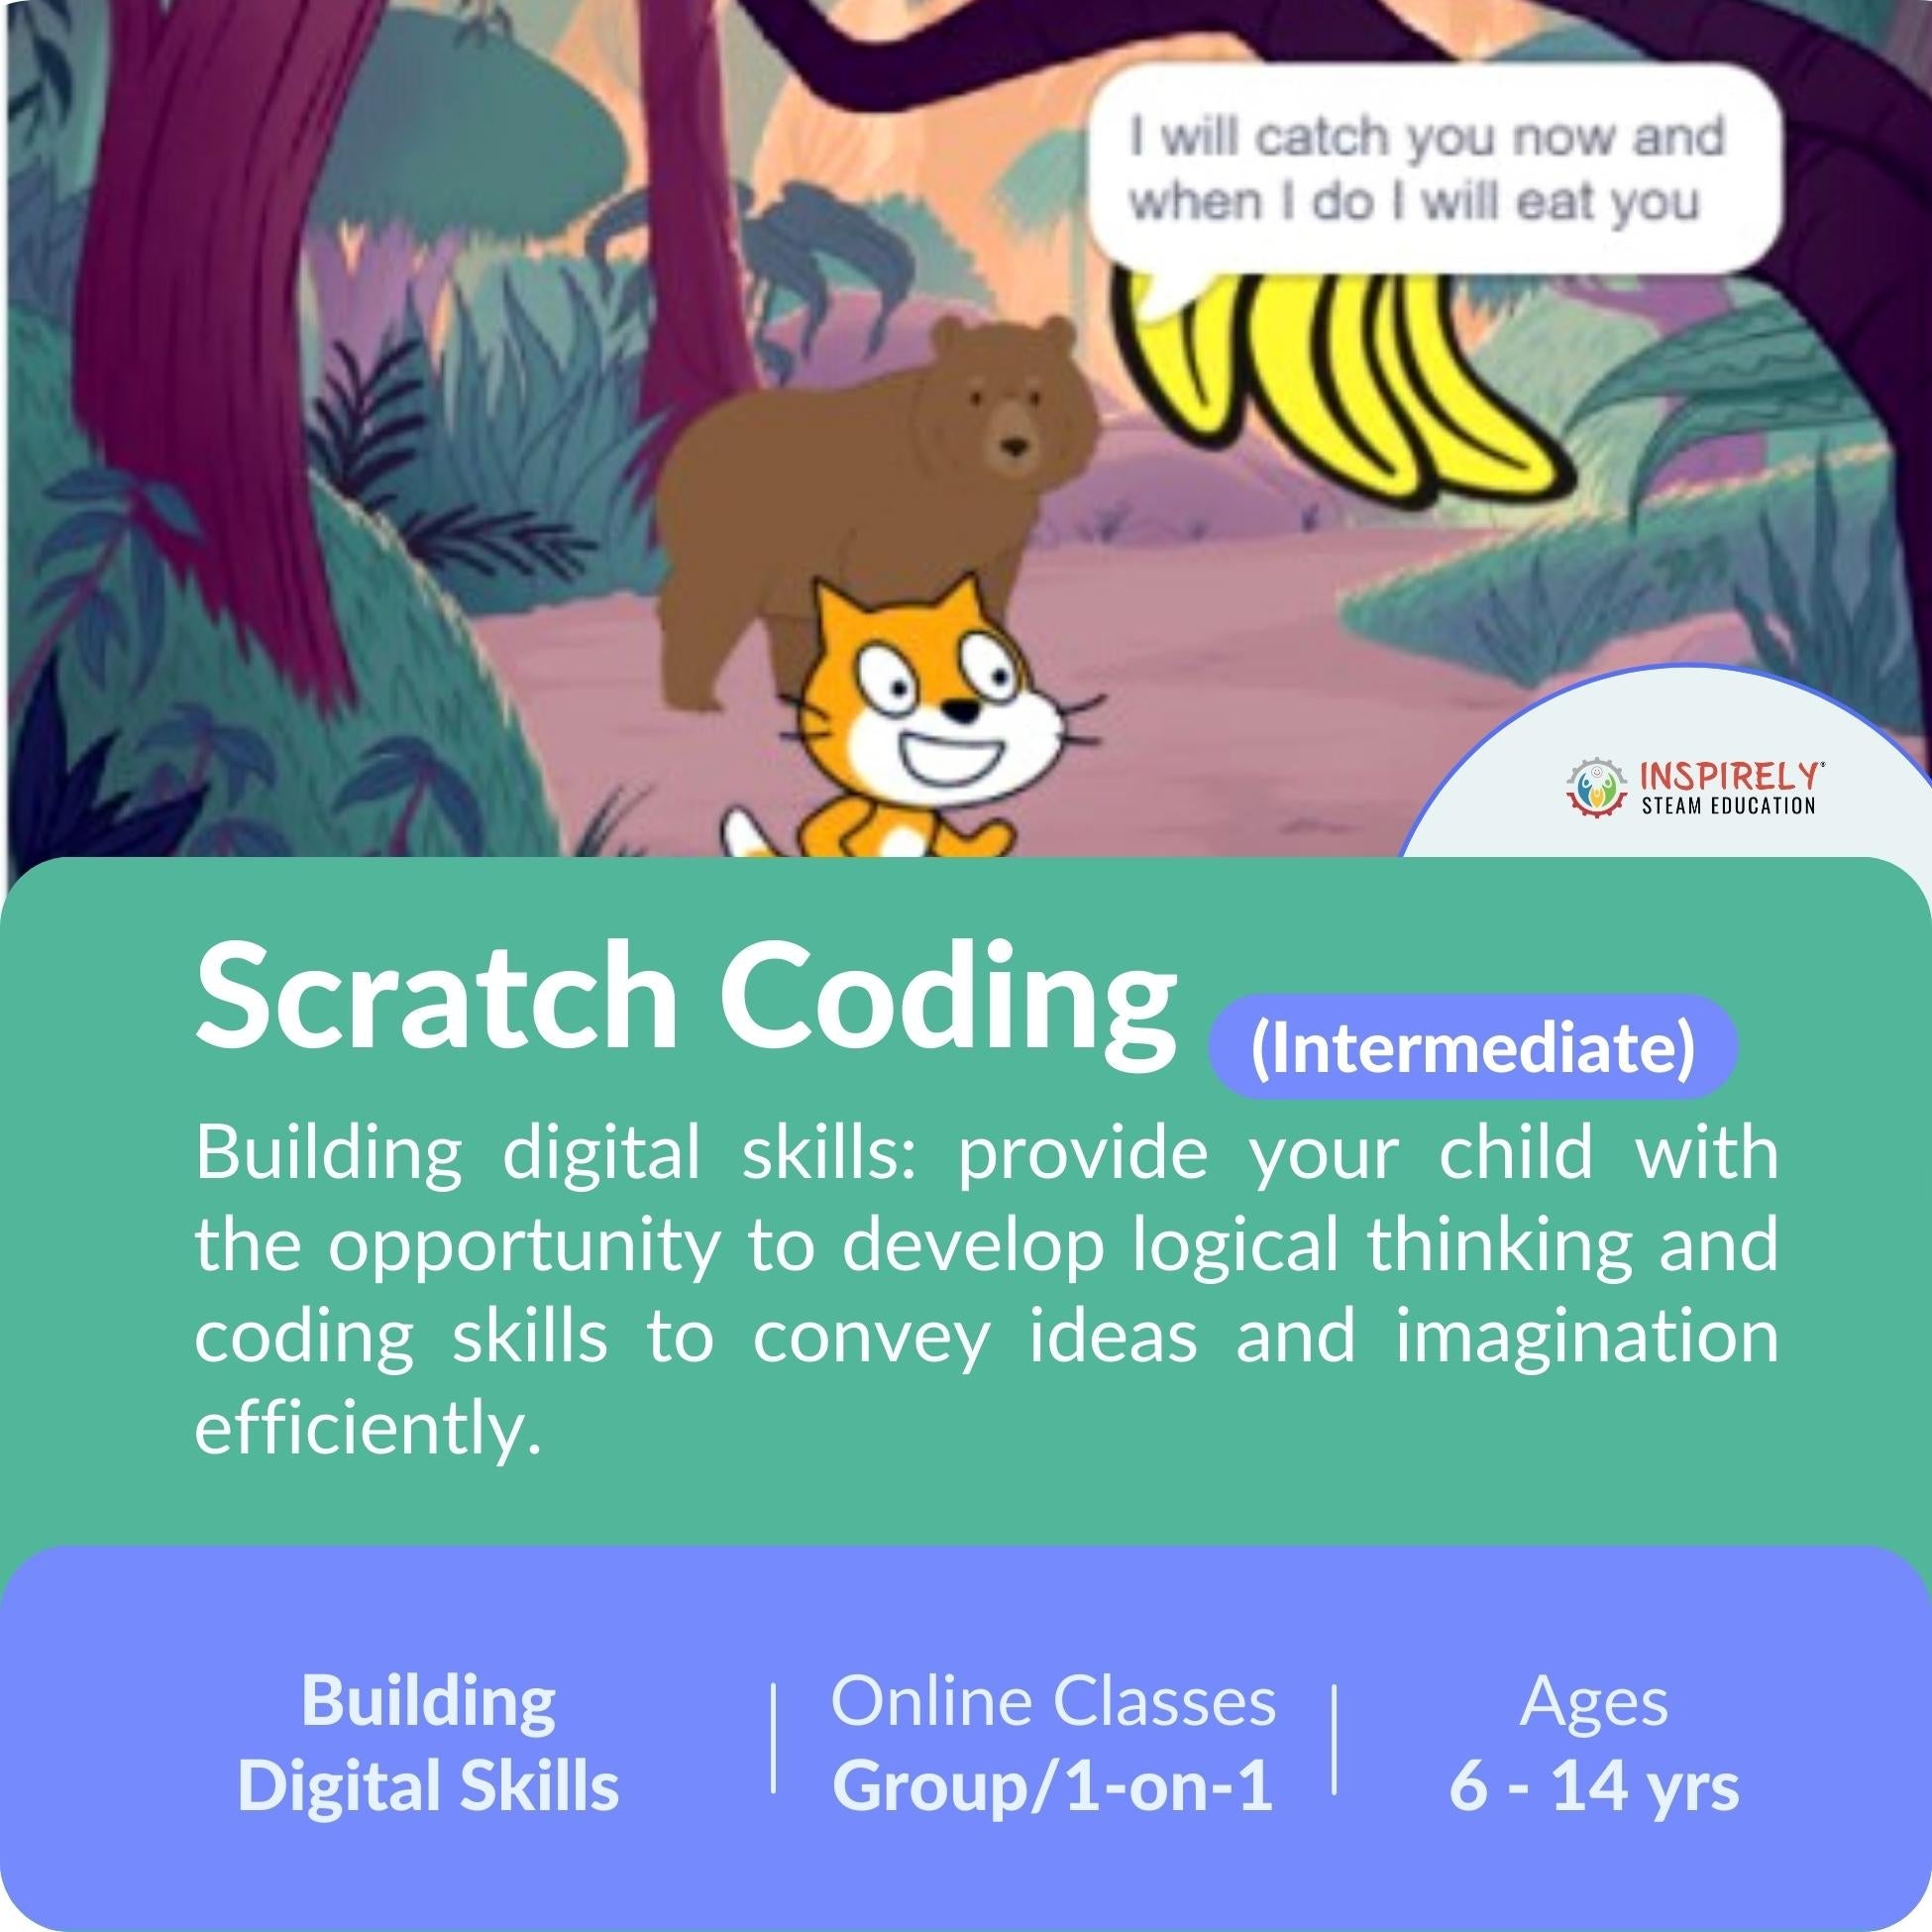 INSPIRELY Scratch coding classes for kids Intermediate level coding for children Online coding classes for kids Canadian and US-based coding classes Scratch programming for children Kids coding courses Coding education for children Children's coding lessons online Scratch coding lessons for kids Children's coding classes Learn to code with Scratch Online coding courses for kids Children's coding classes in Canada & USA Scratch programming courses for children Canadian and US-based kids coding classes